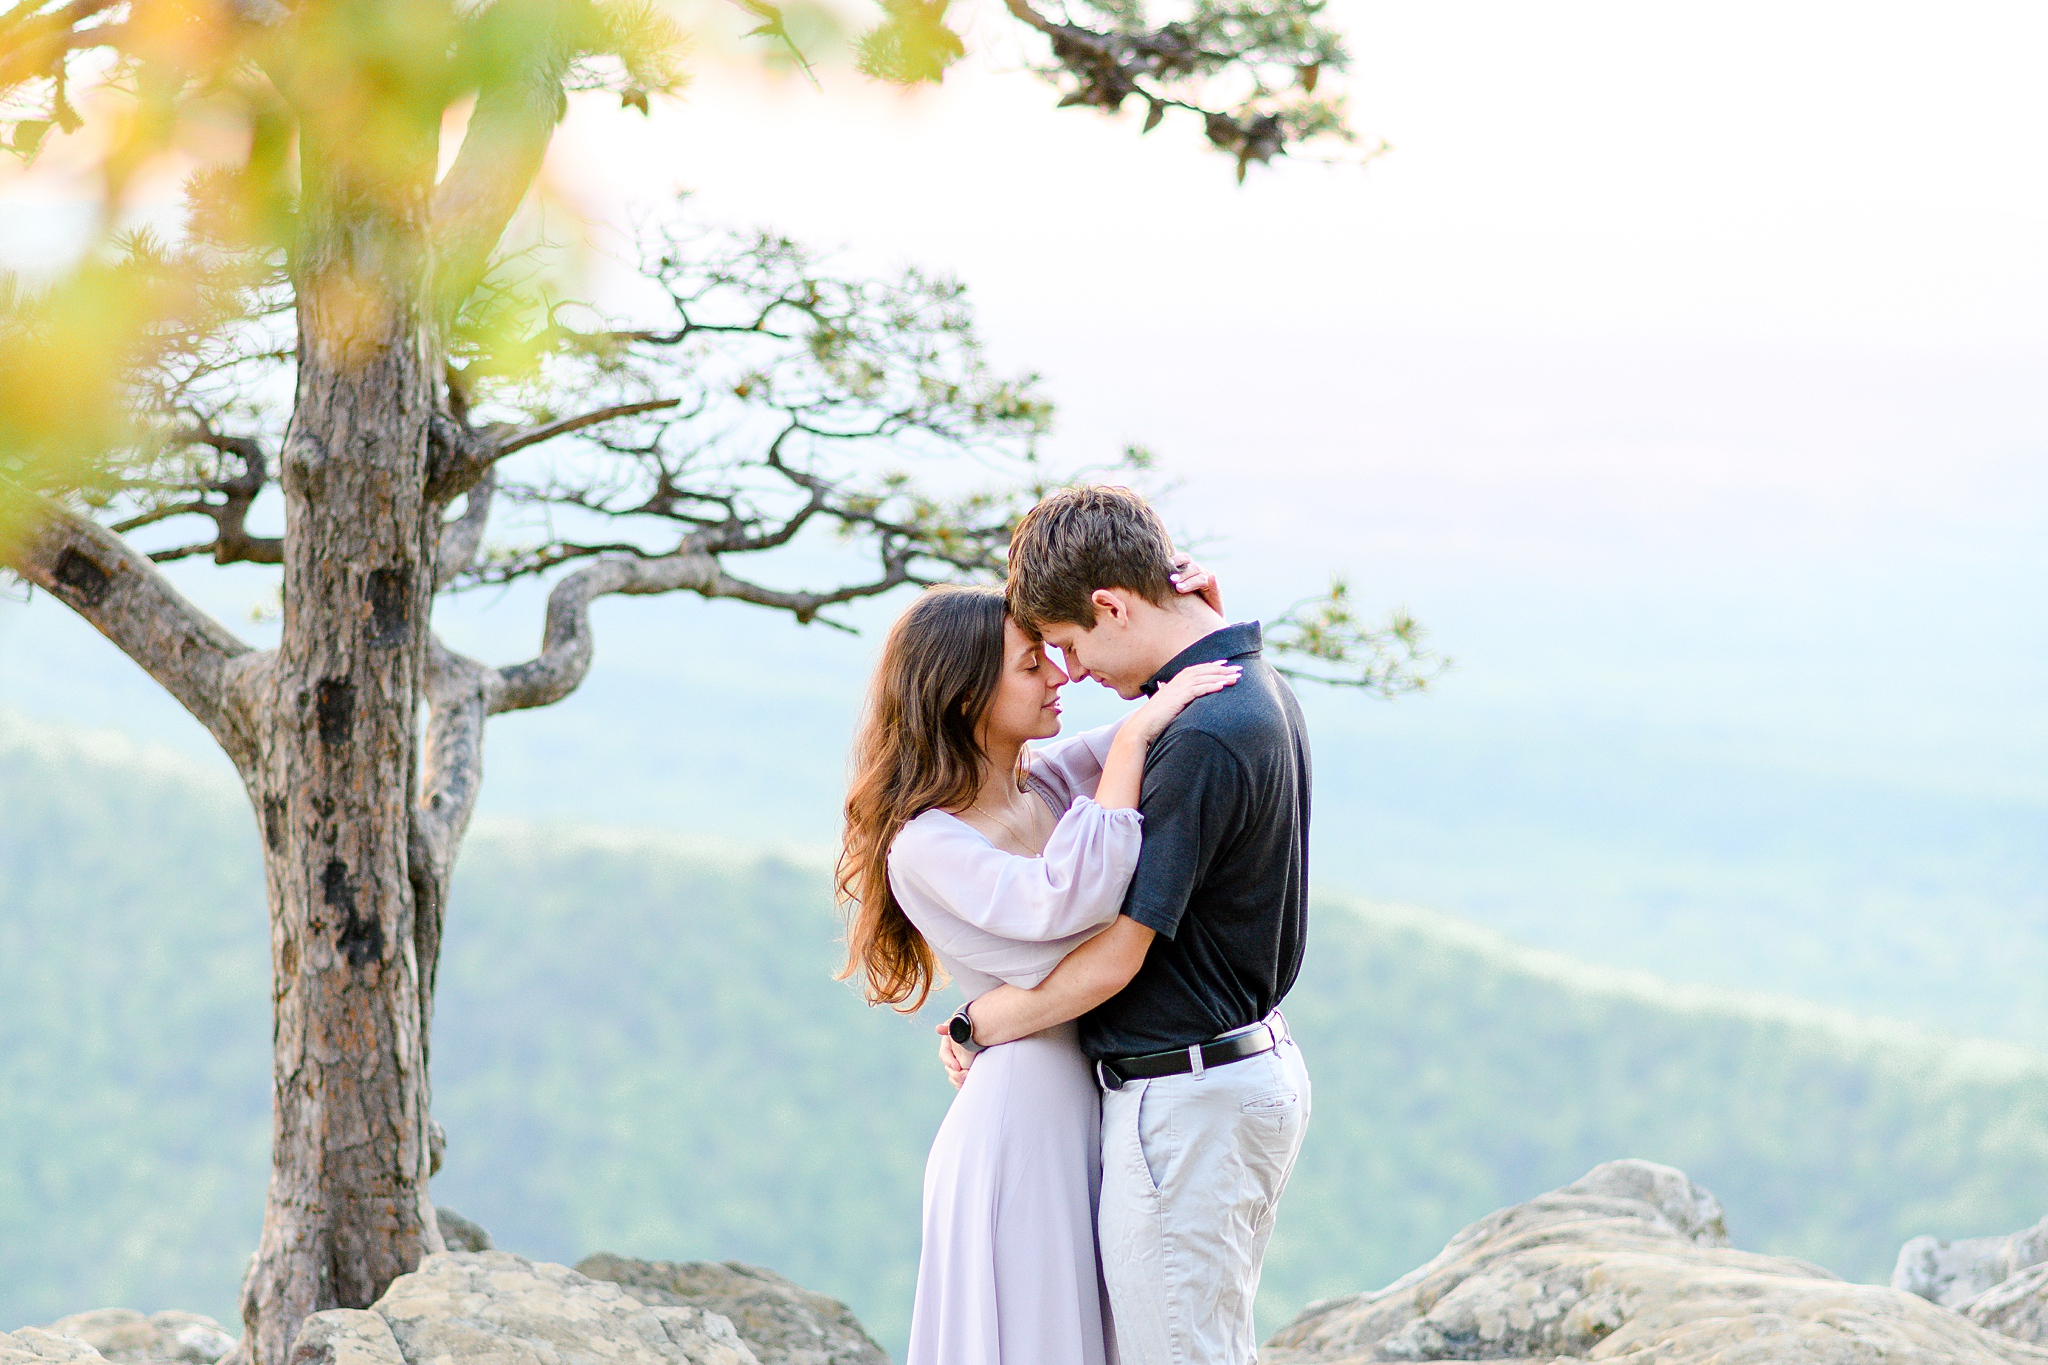 A beautiful engagement photo captured at Ravens Roost